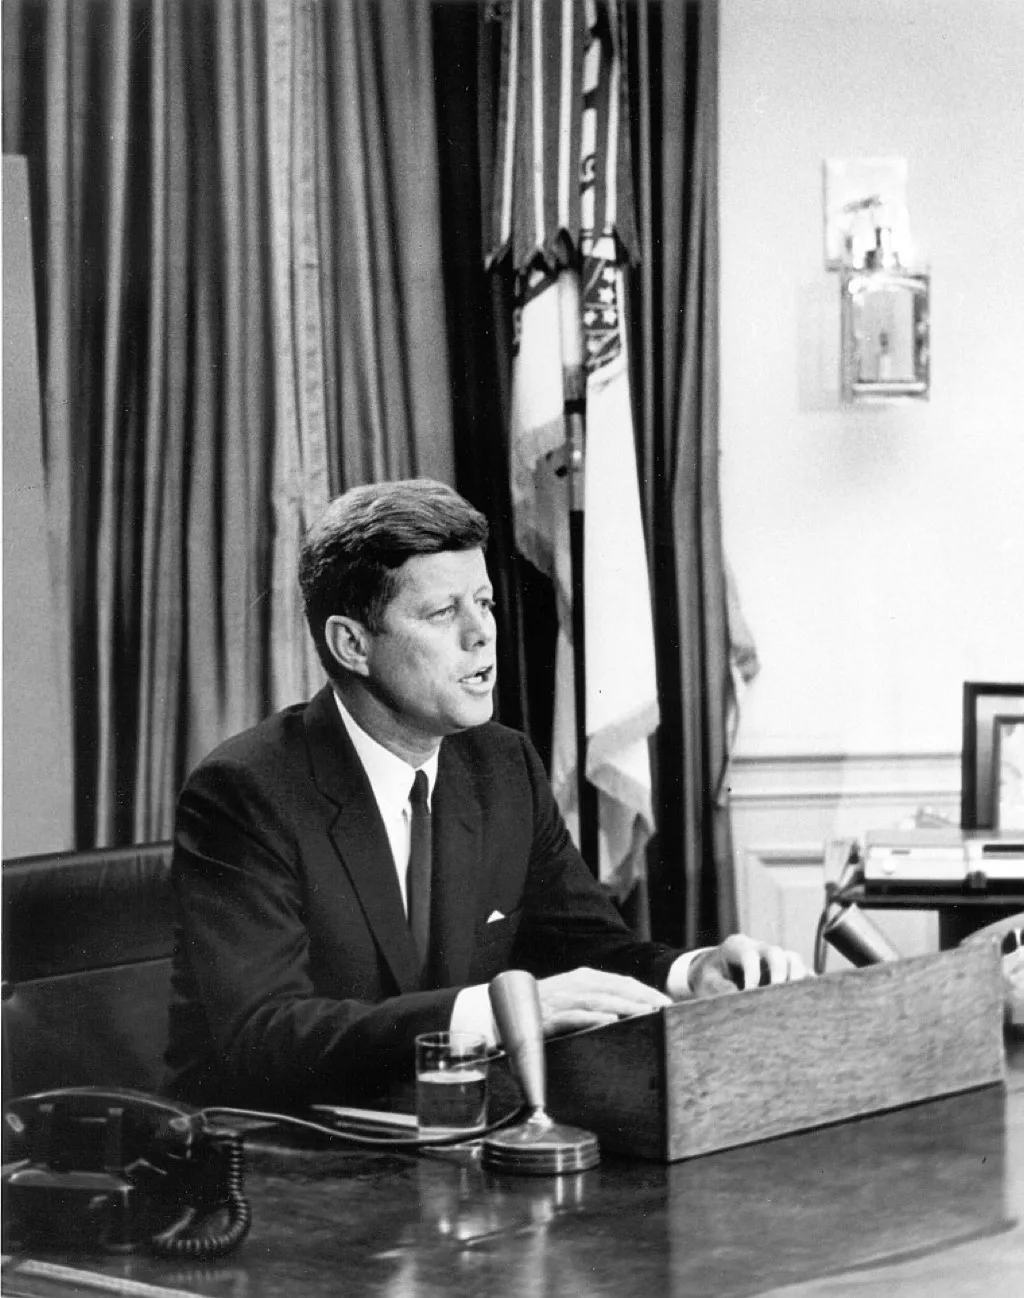 JFK talking in the oval office, what the government is hiding